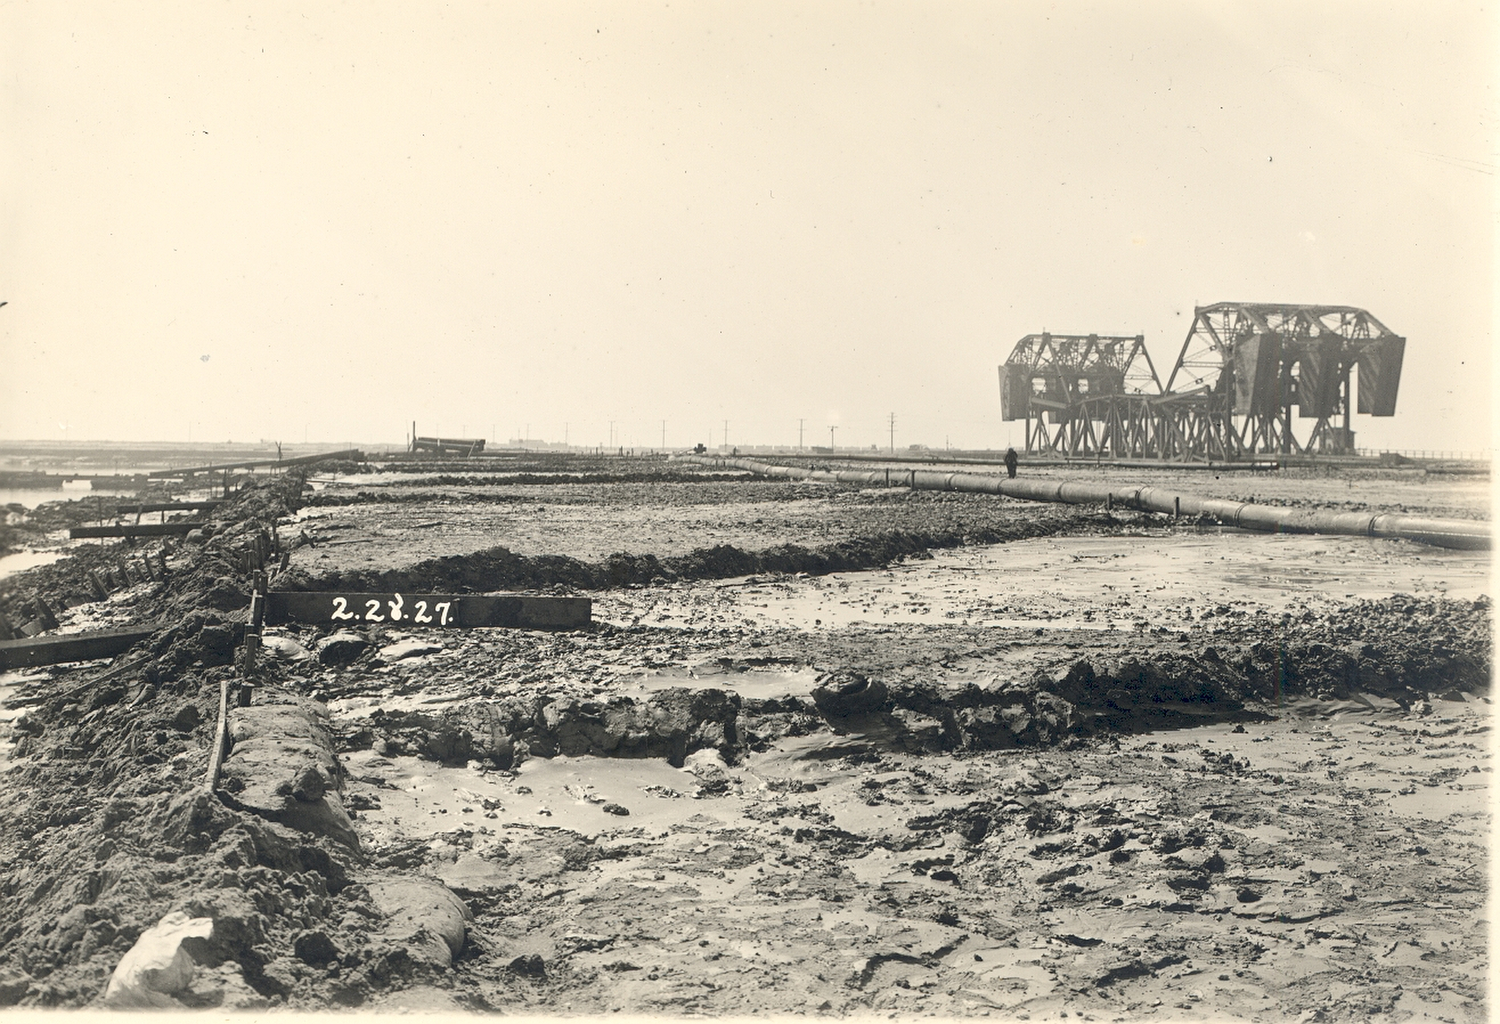 Dredging and other preparatory work is ongoing for the Ford Motor plant in 1927. The plant opened in 1930. At right is the Badger Avenue Bridge (later the Henry Ford Bridge), a railroad drawbridge across the Cerritos Channel. A more modern version of the bridge is still in place.